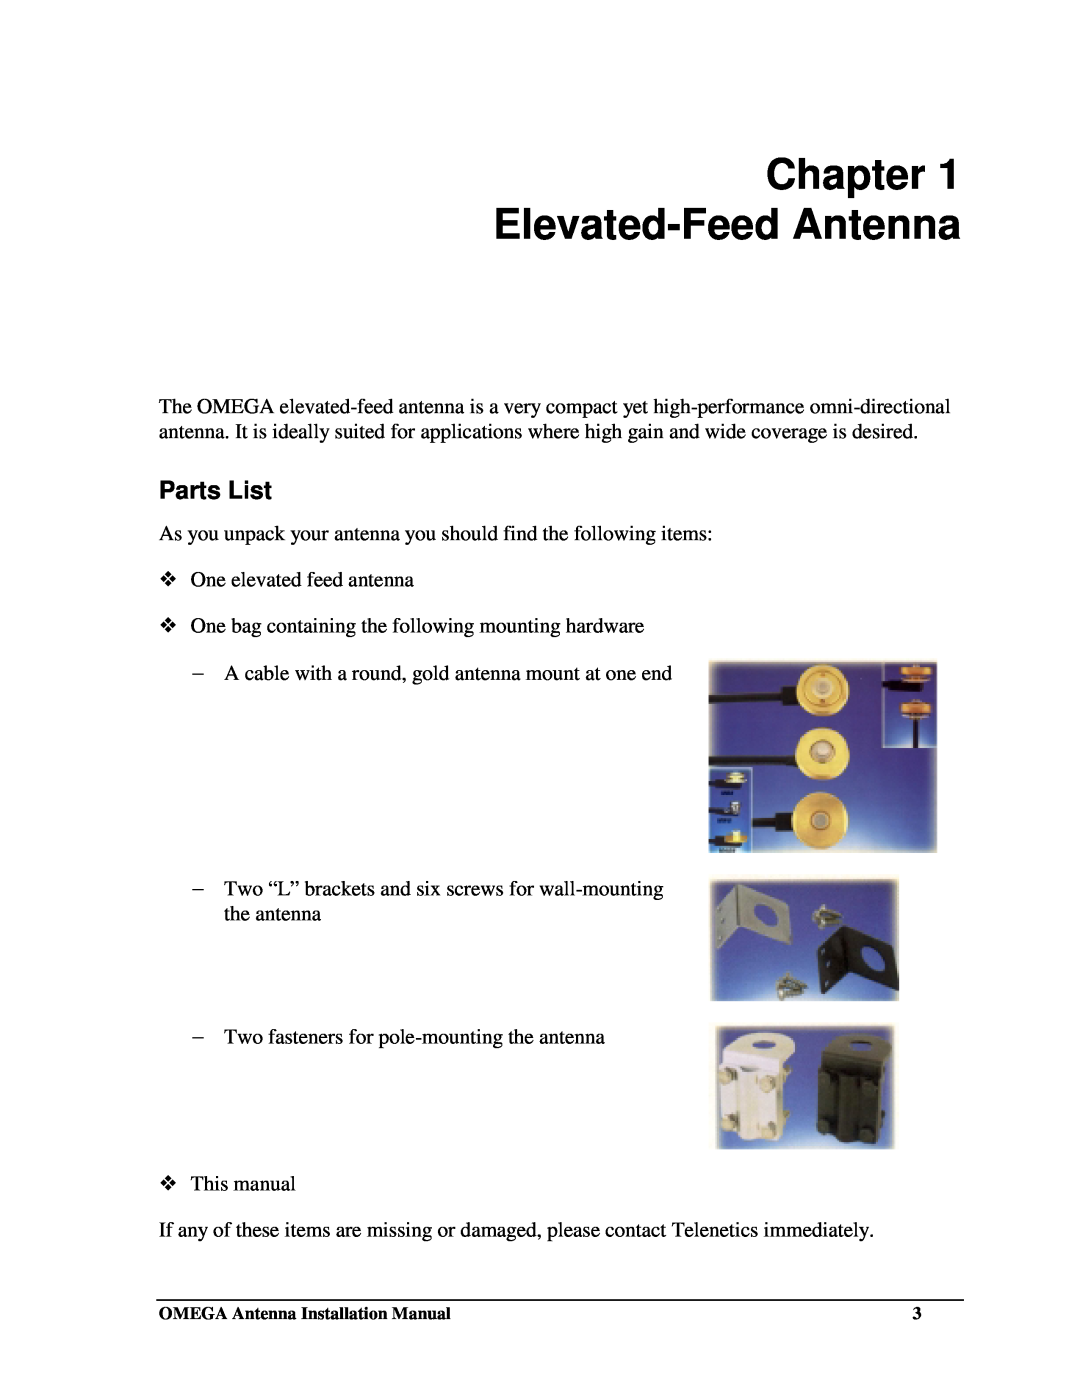 Telenetics Communications and Interface Cabinet Antenna installation manual Chapter Elevated-FeedAntenna, Parts List 